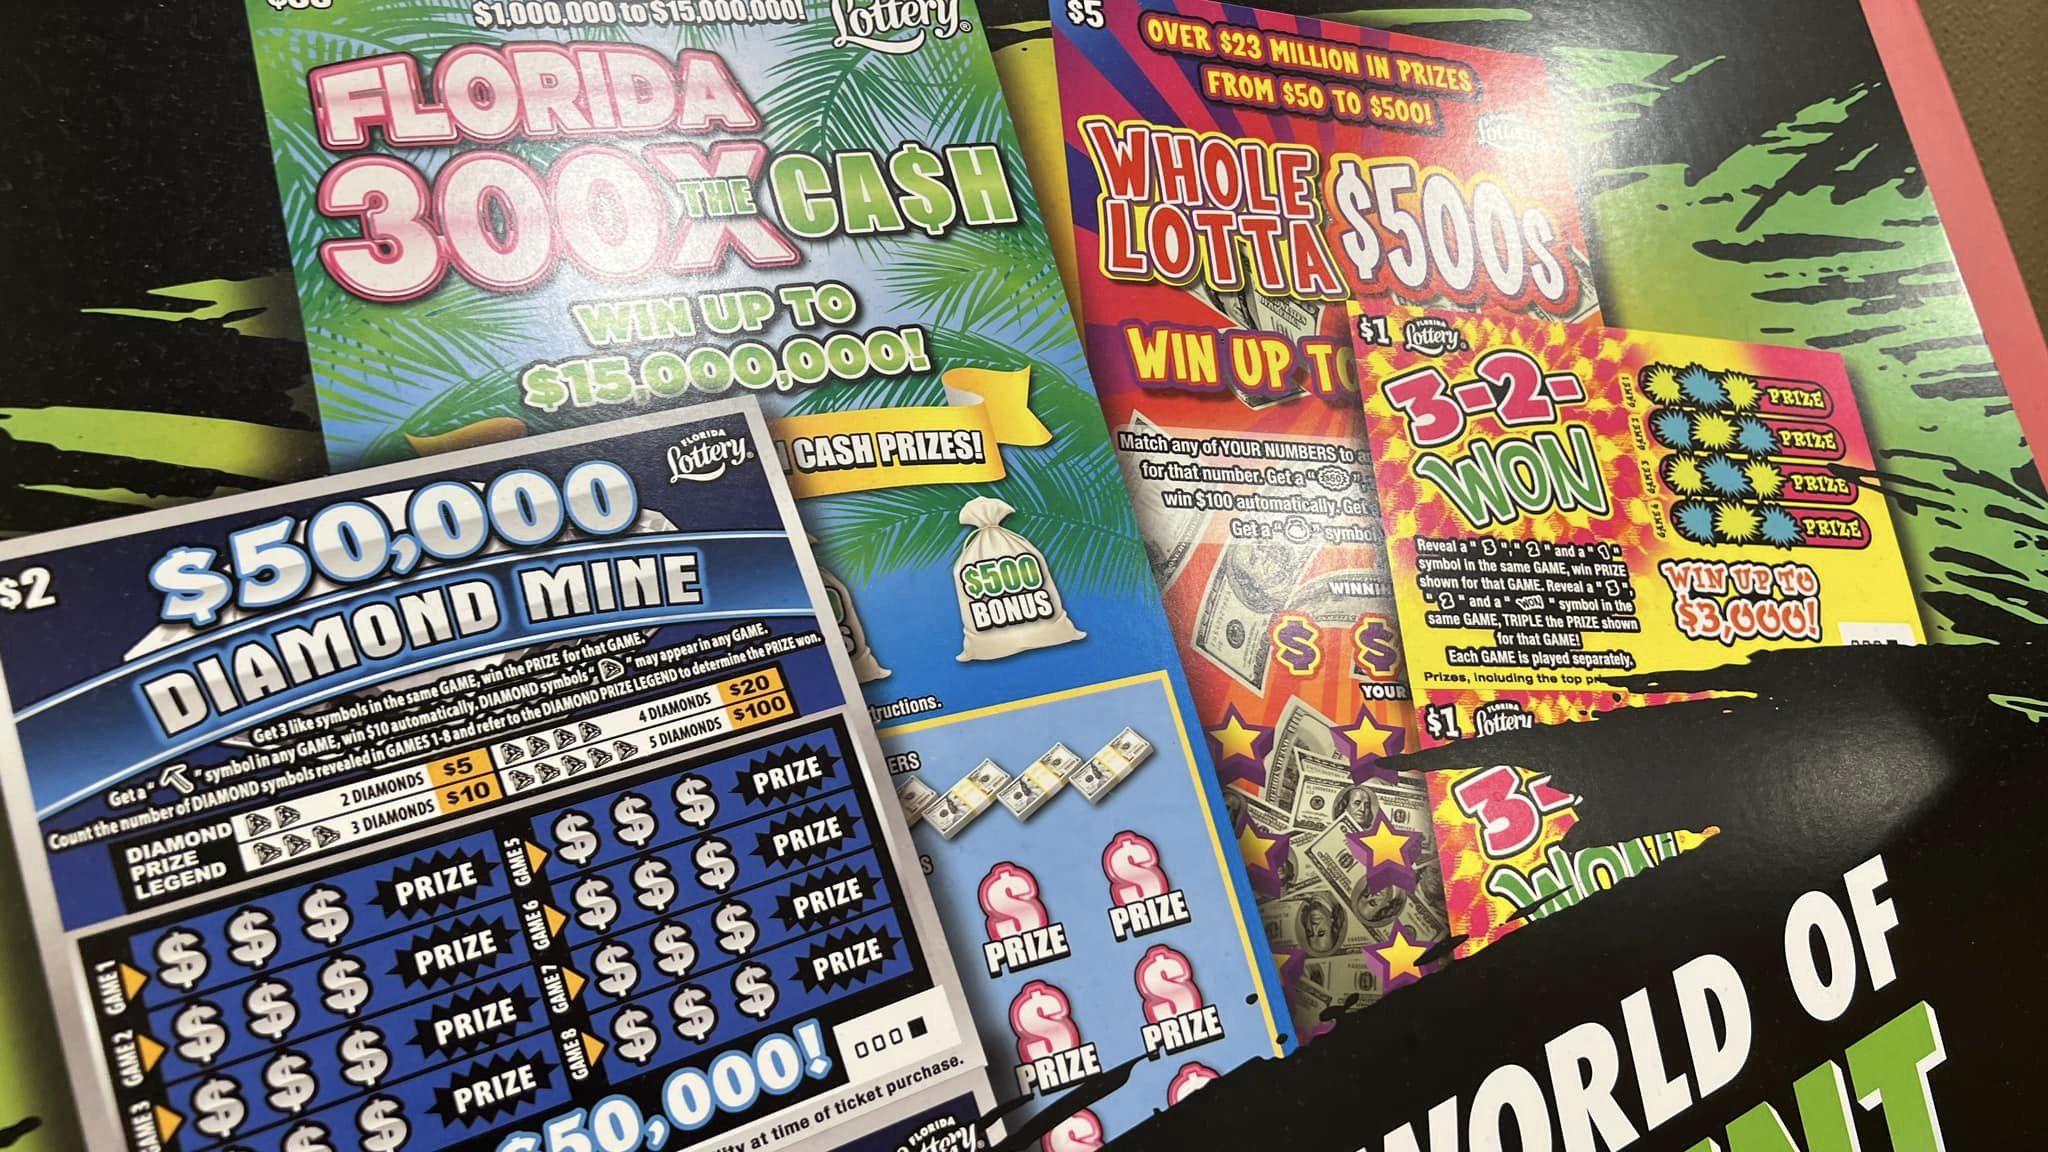 These $5 Scratch-off Tickets Have 32 $1M Top Prizes Remaining